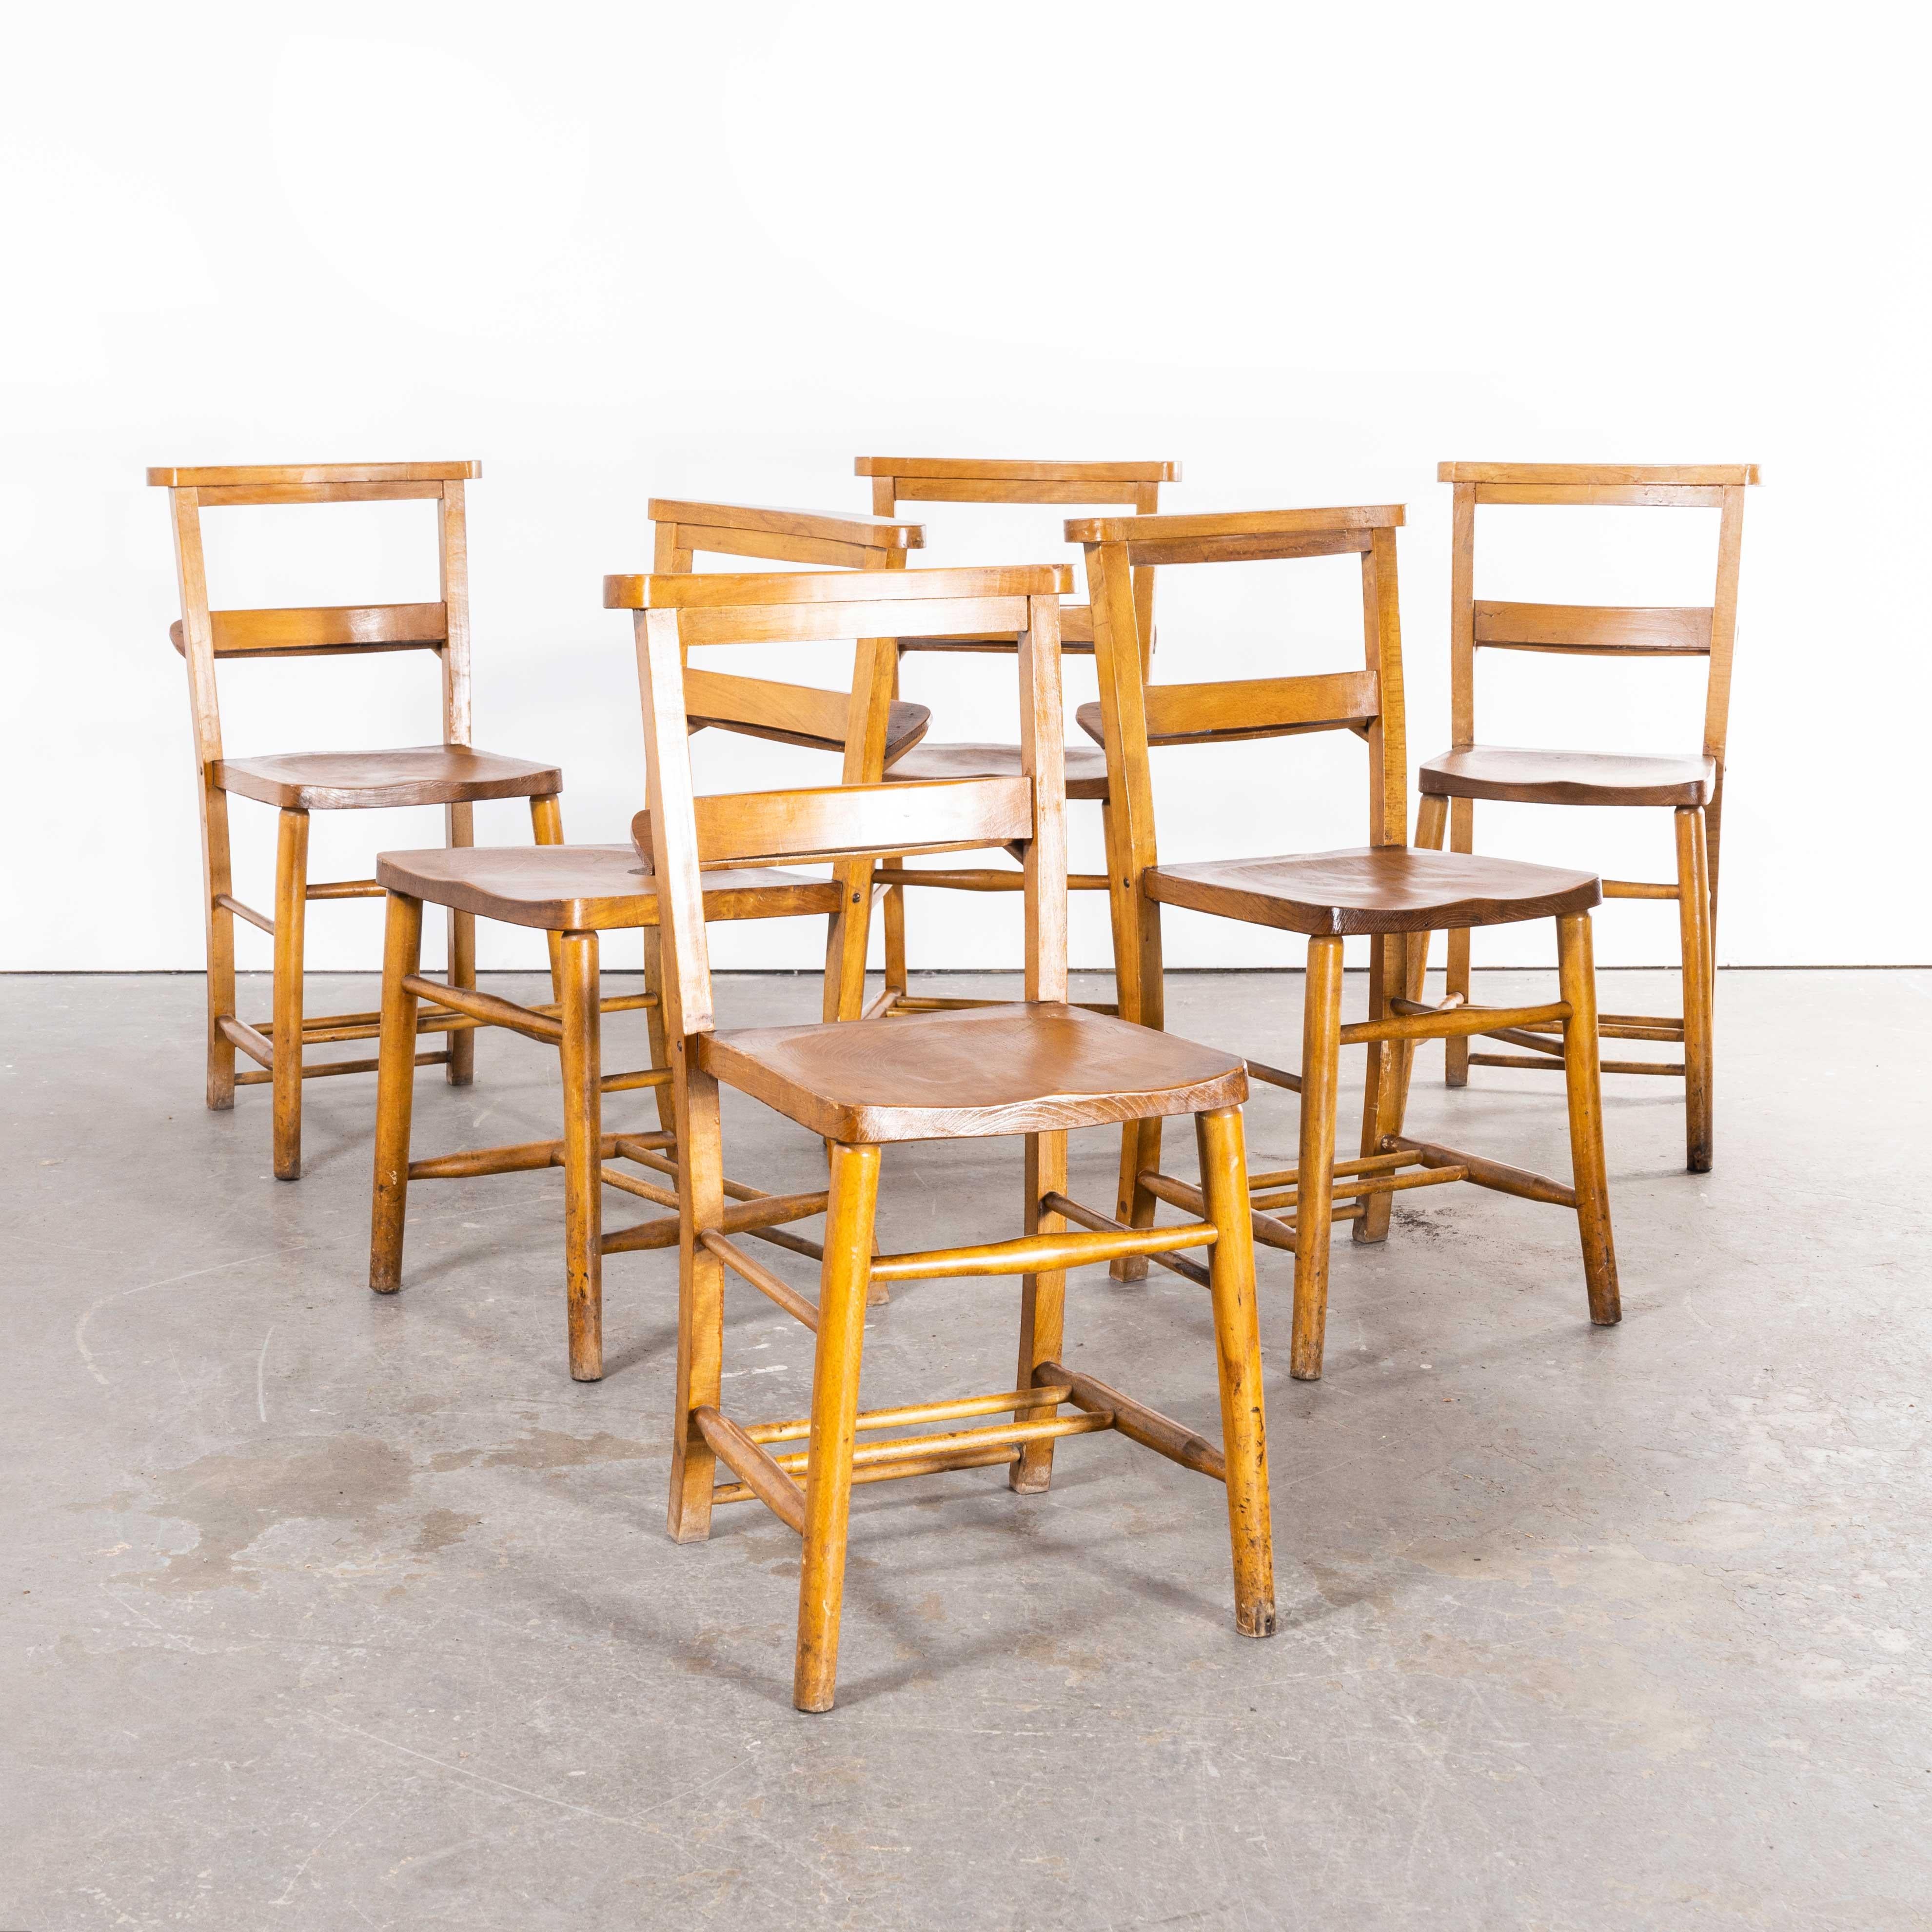 1930s Elm Church dining chair – set of six
1930s Elm Church dining chair – set of six. England has a wonderfully rich heritage for making chairs. At the height of production at the turn of the last century over 4500 chairs were being produced daily